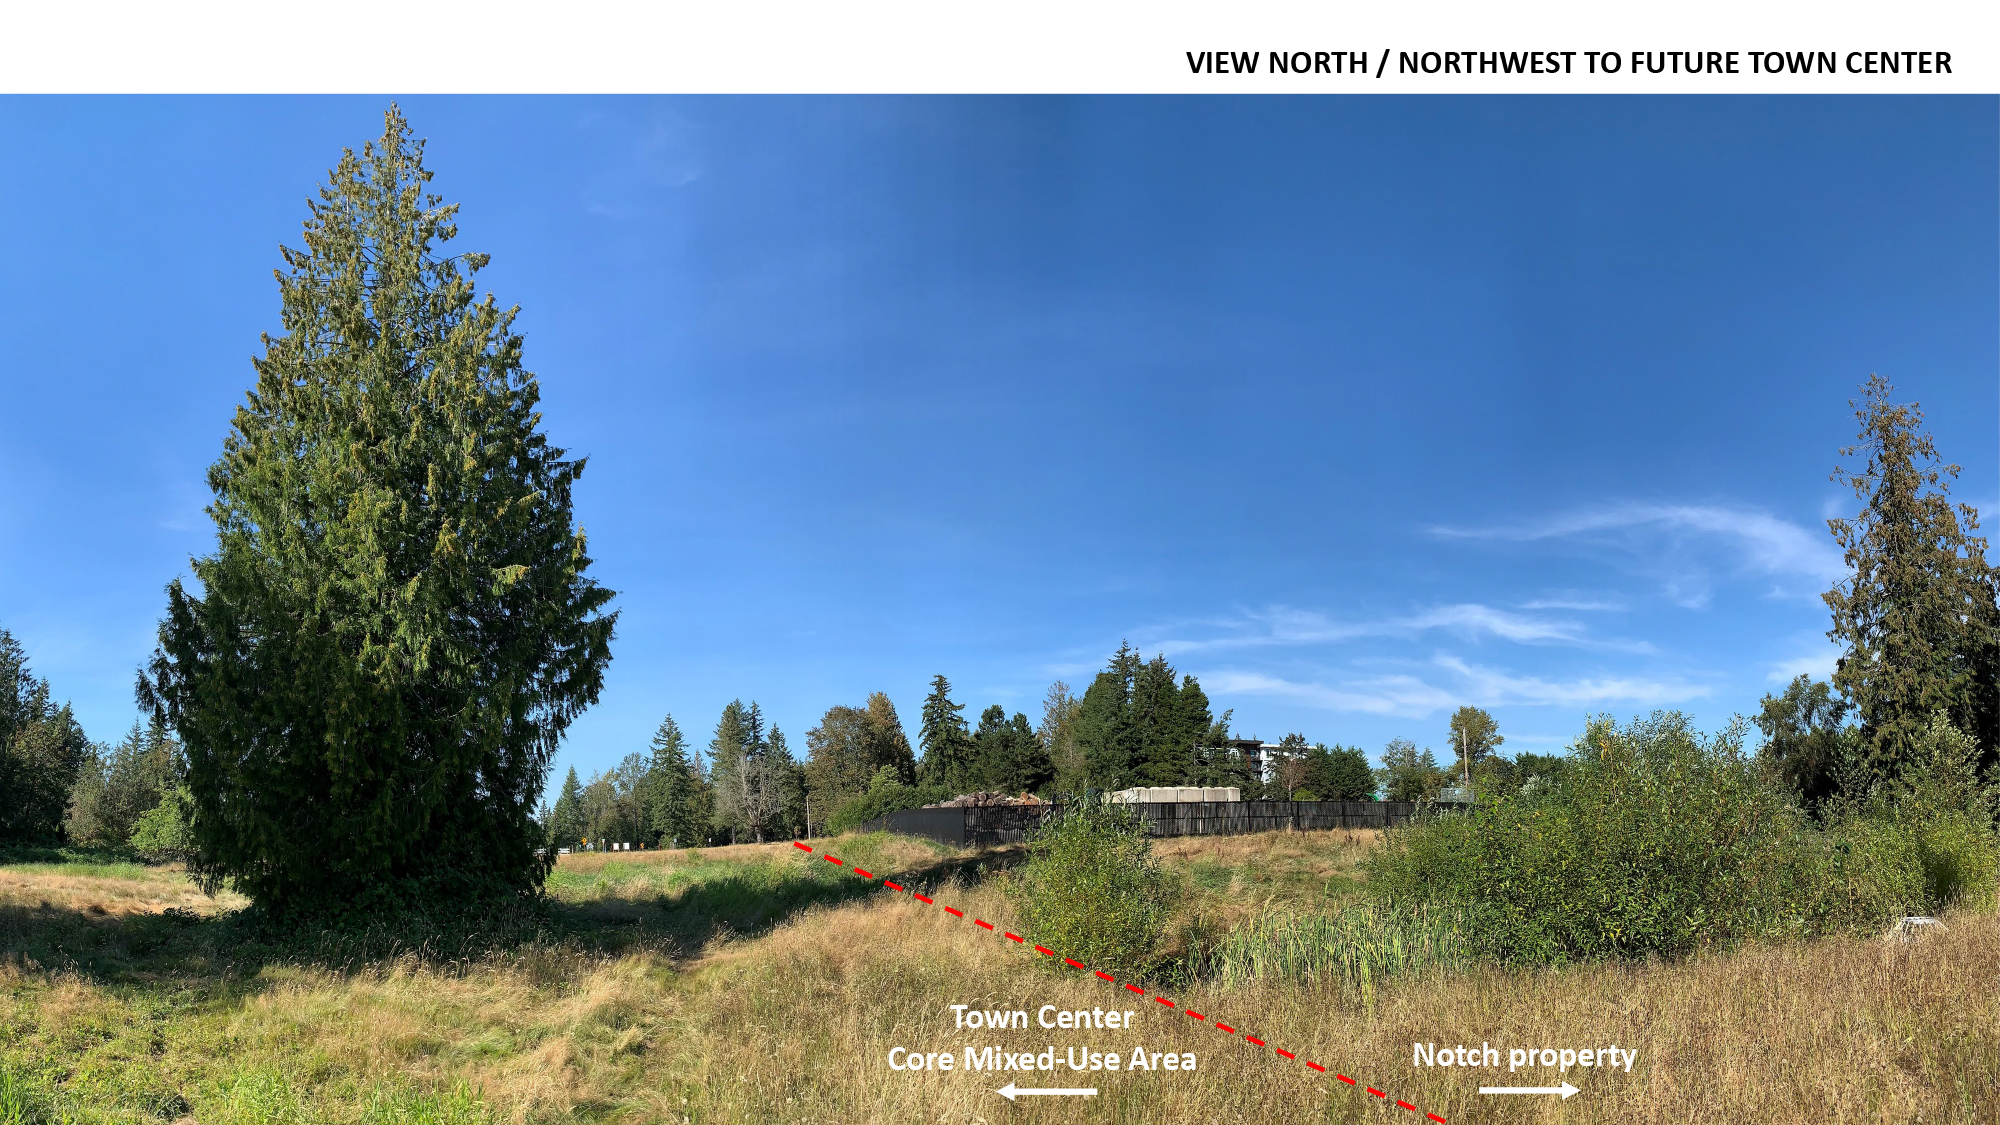 Grassy meadow area with a few trees and foliage. Verbiage indicates right arrow to Notch property and left arrow to Town Center Core Mixed-Use Area in Sammamish.